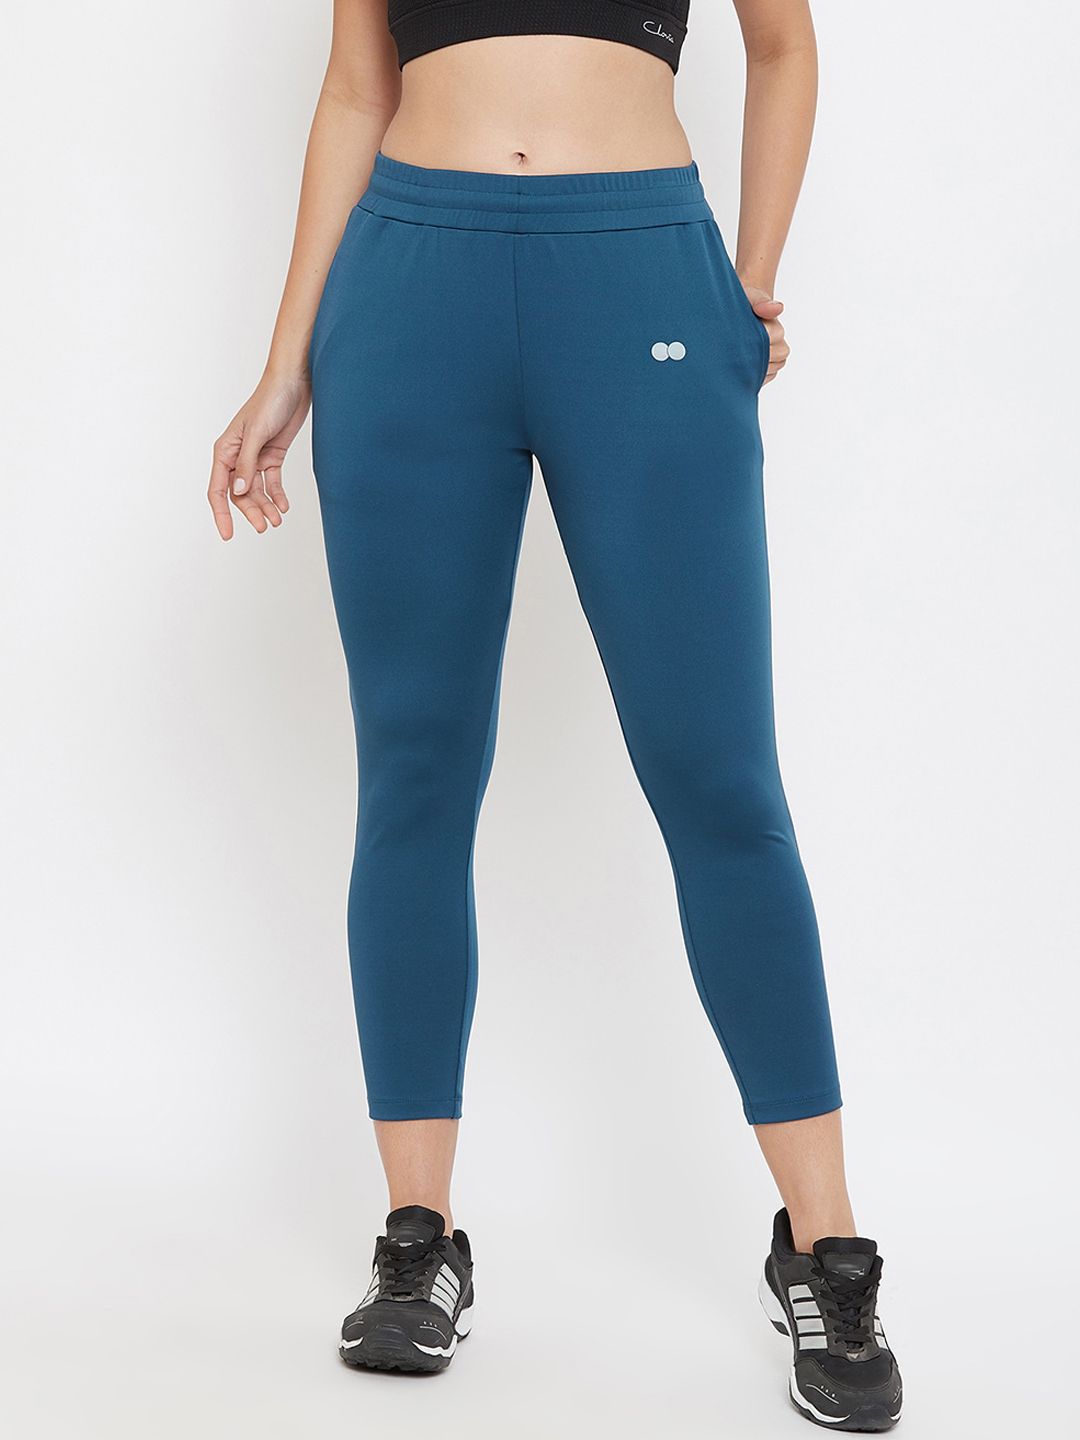 Clovia Women Teal Blue Solid Rapid Dry Sports Tights Price in India